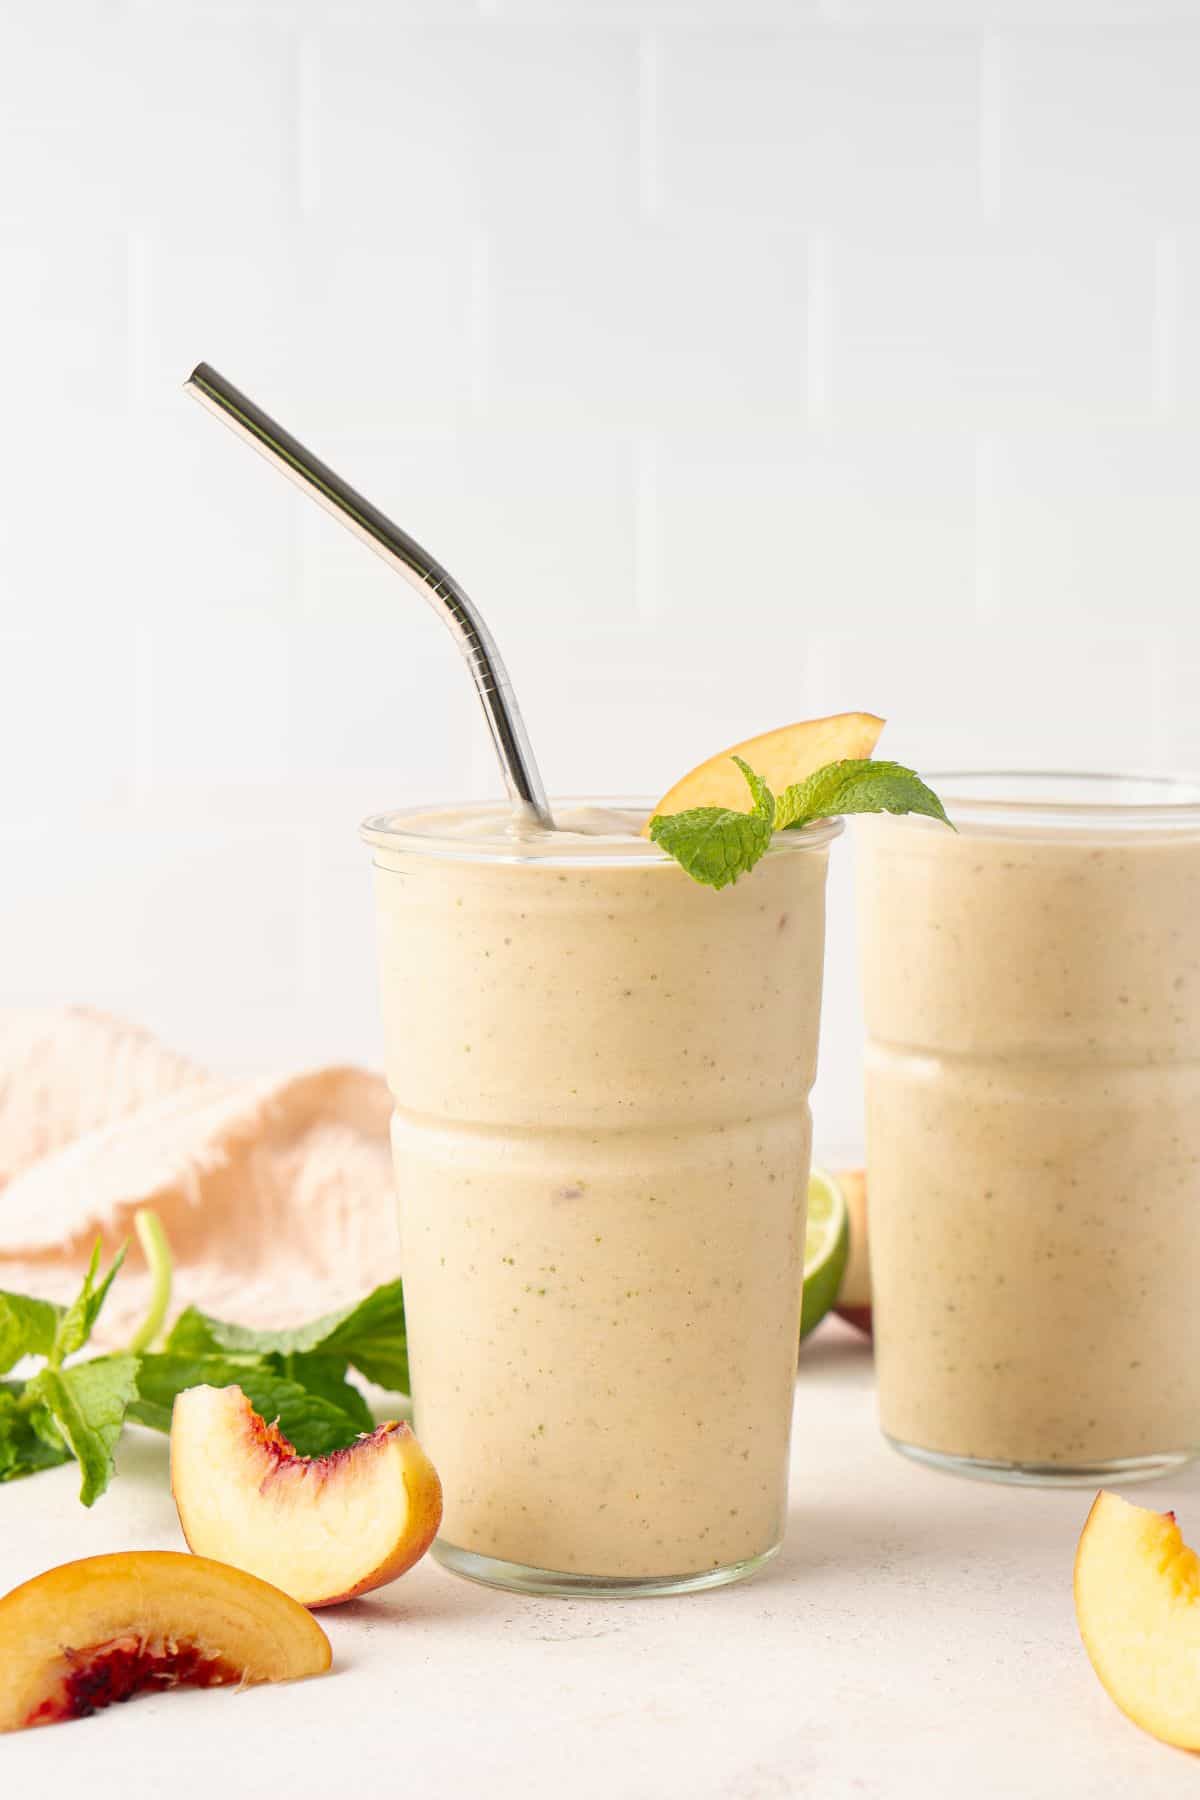 Two glasses full of Peach and Banana Smoothie, one with a straw, with some pieces of peach and fresh mint leaves on the edge.